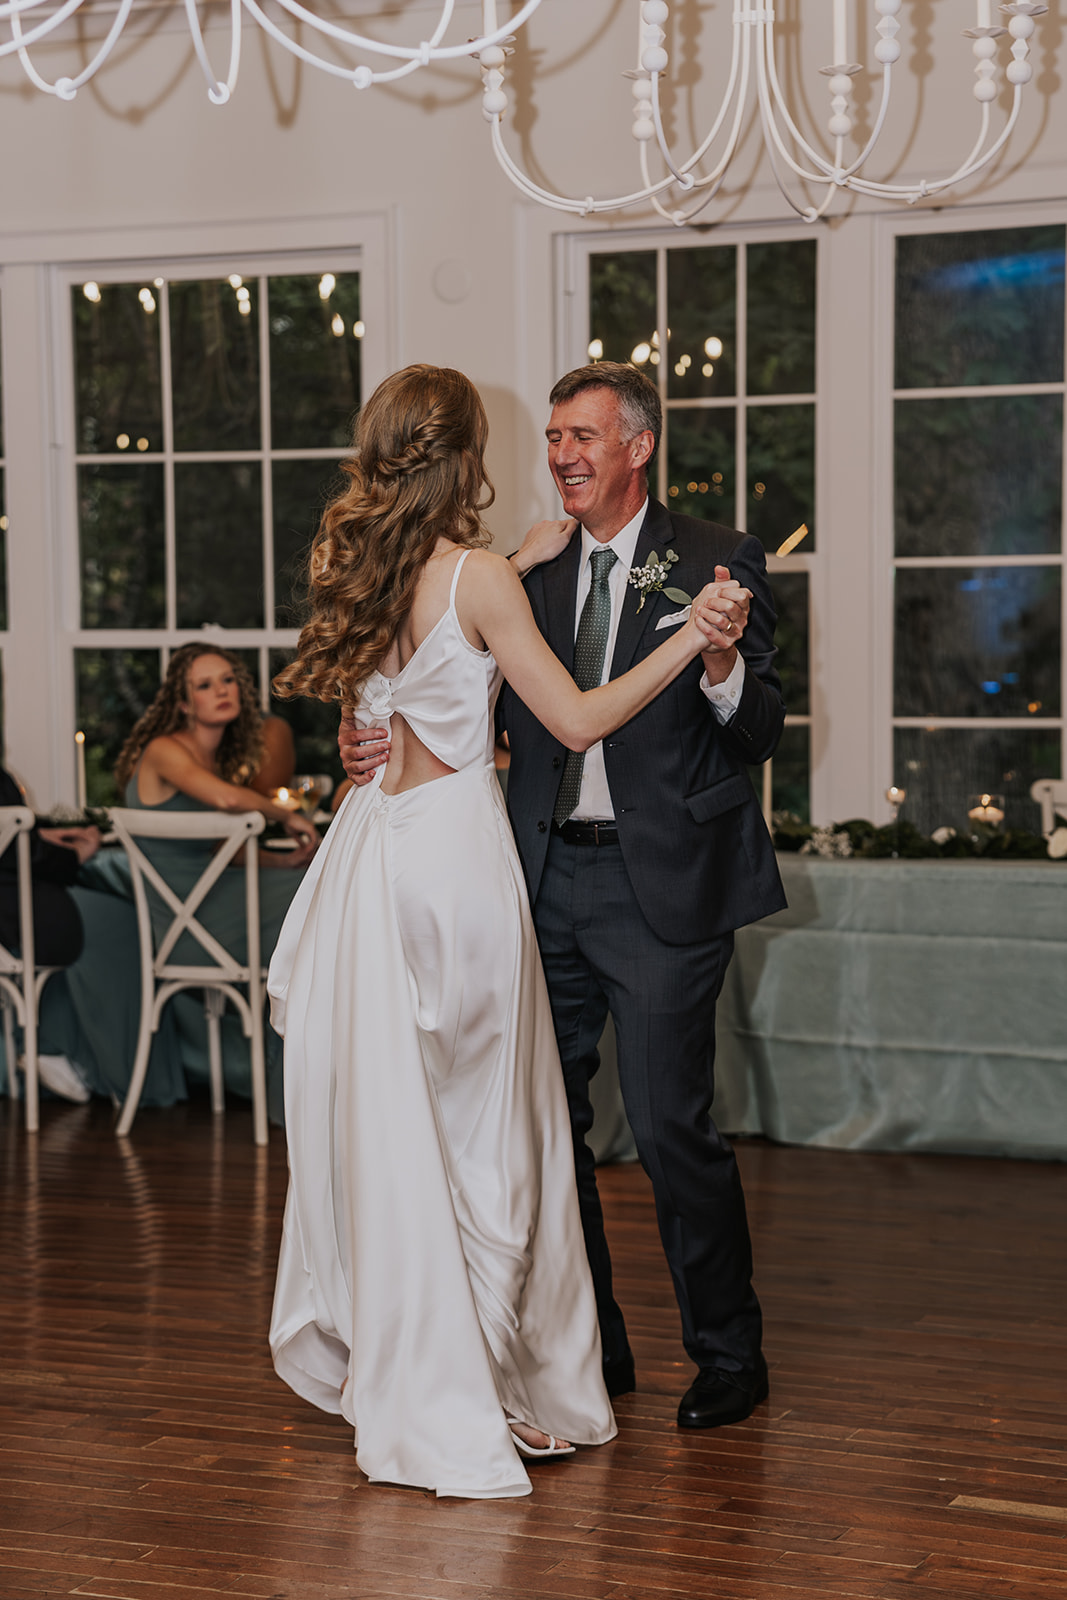 Bride and her father share a dance together